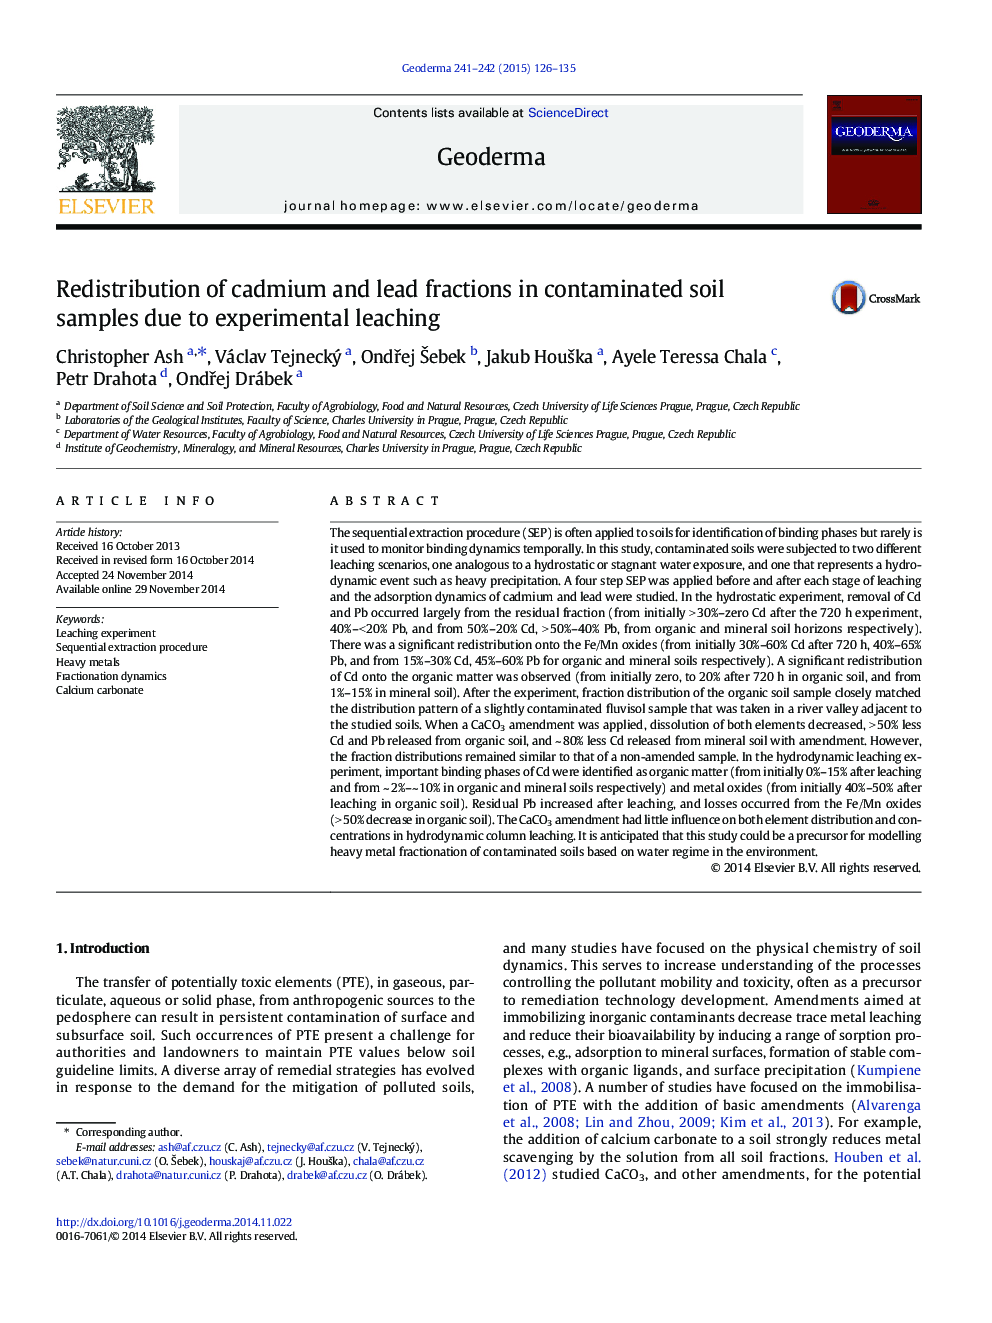 Redistribution of cadmium and lead fractions in contaminated soil samples due to experimental leaching